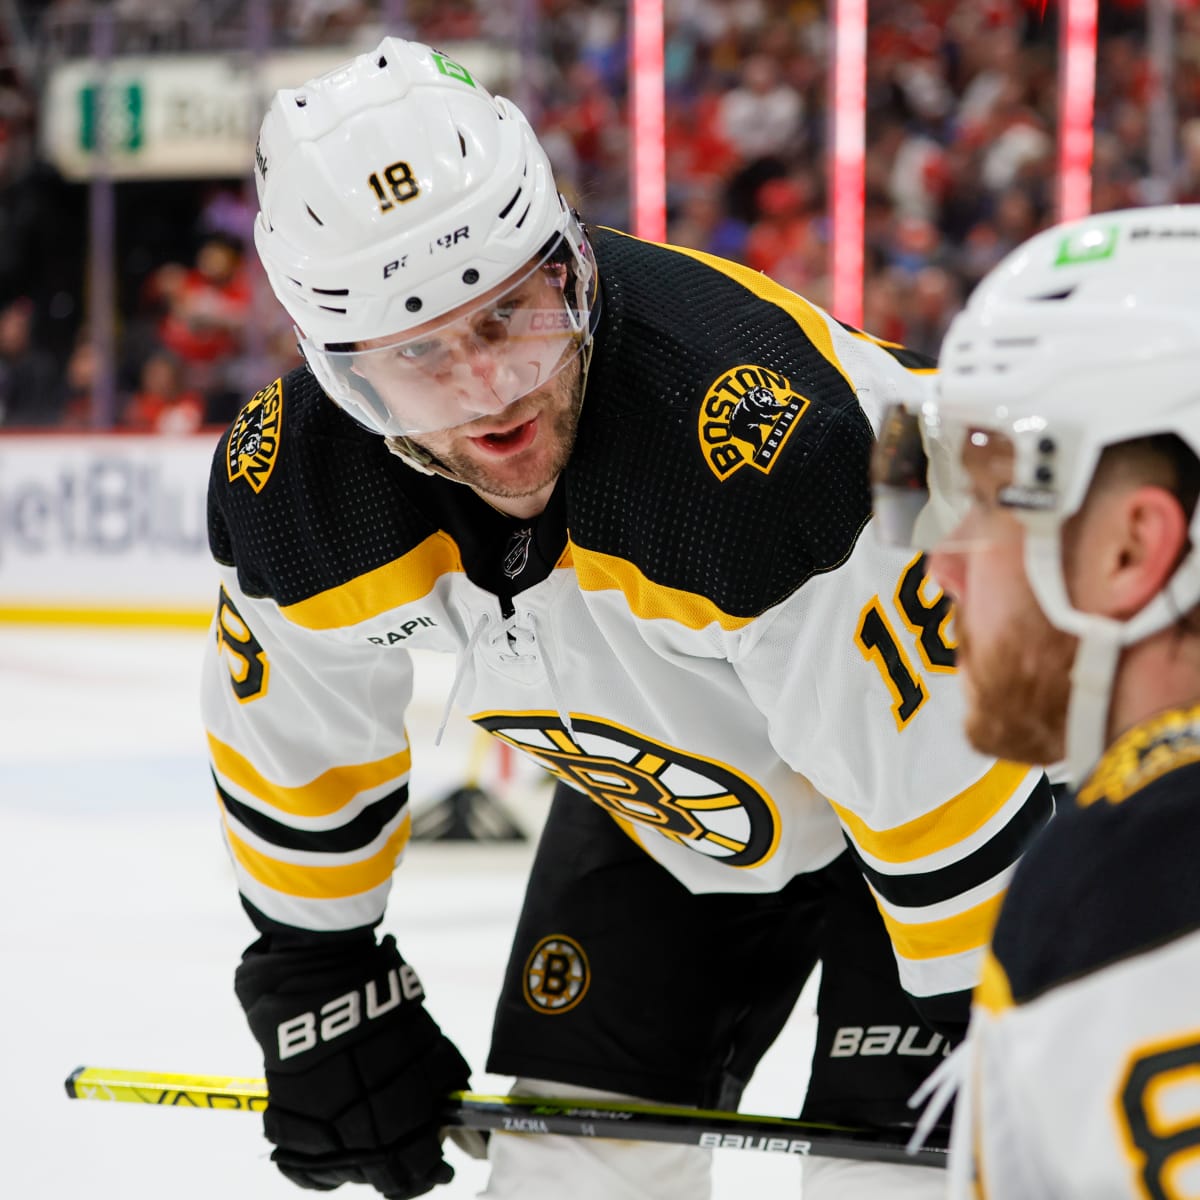 The Bruins' Pavel Zacha, an NHL dream and a parenting experiment